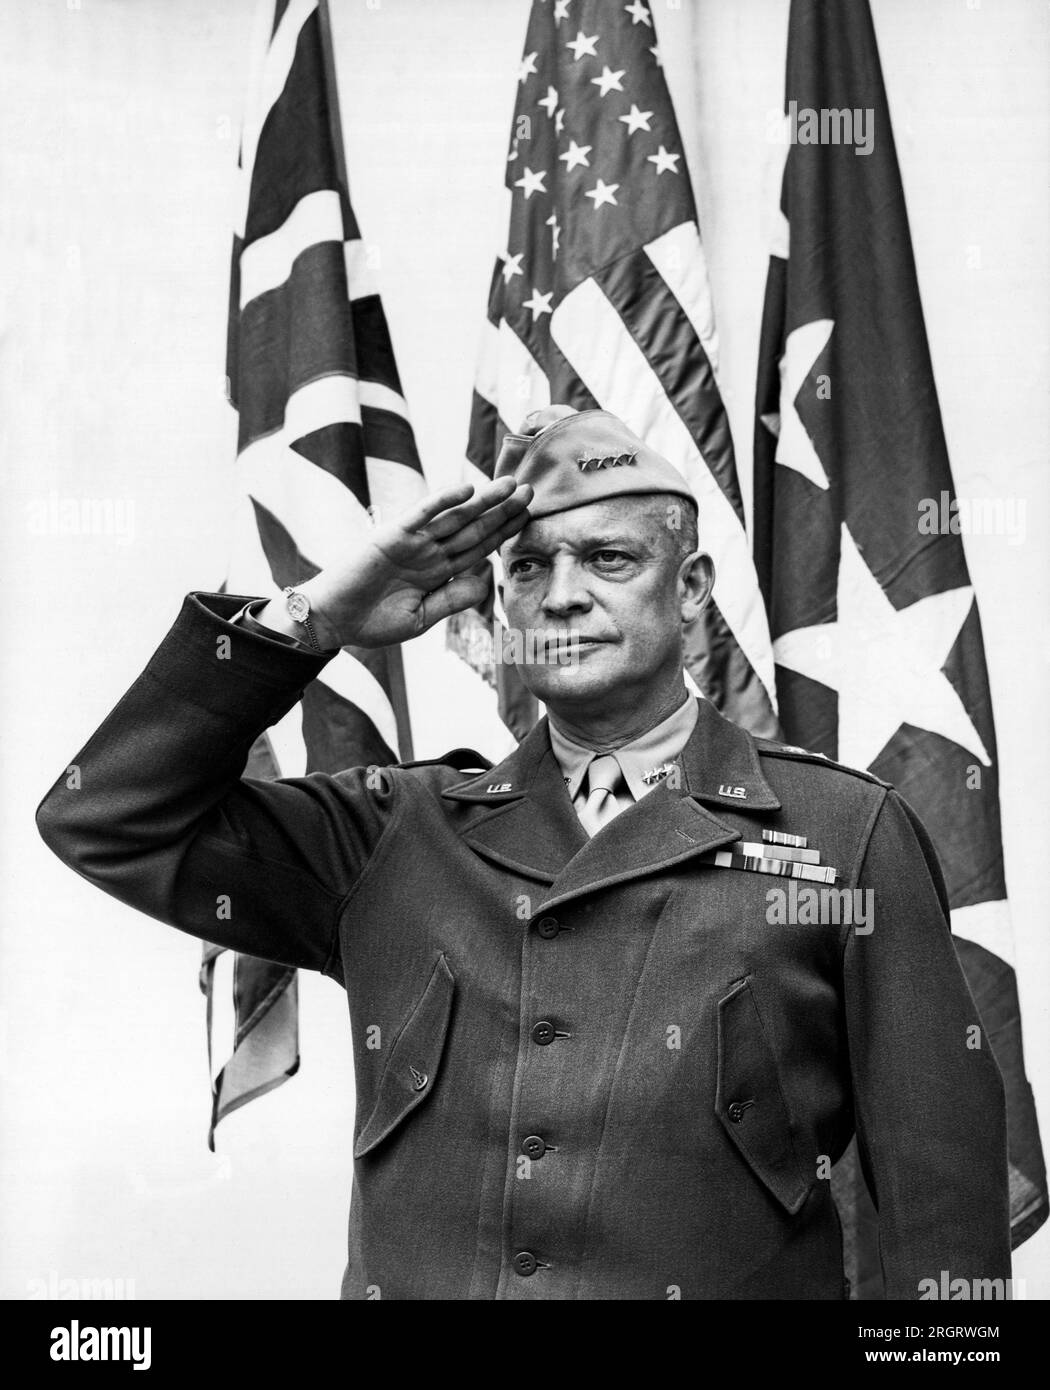 United States:  c. 1943 Four star General Dwight D. Eisenhower stands and salutes the flag. Stock Photo